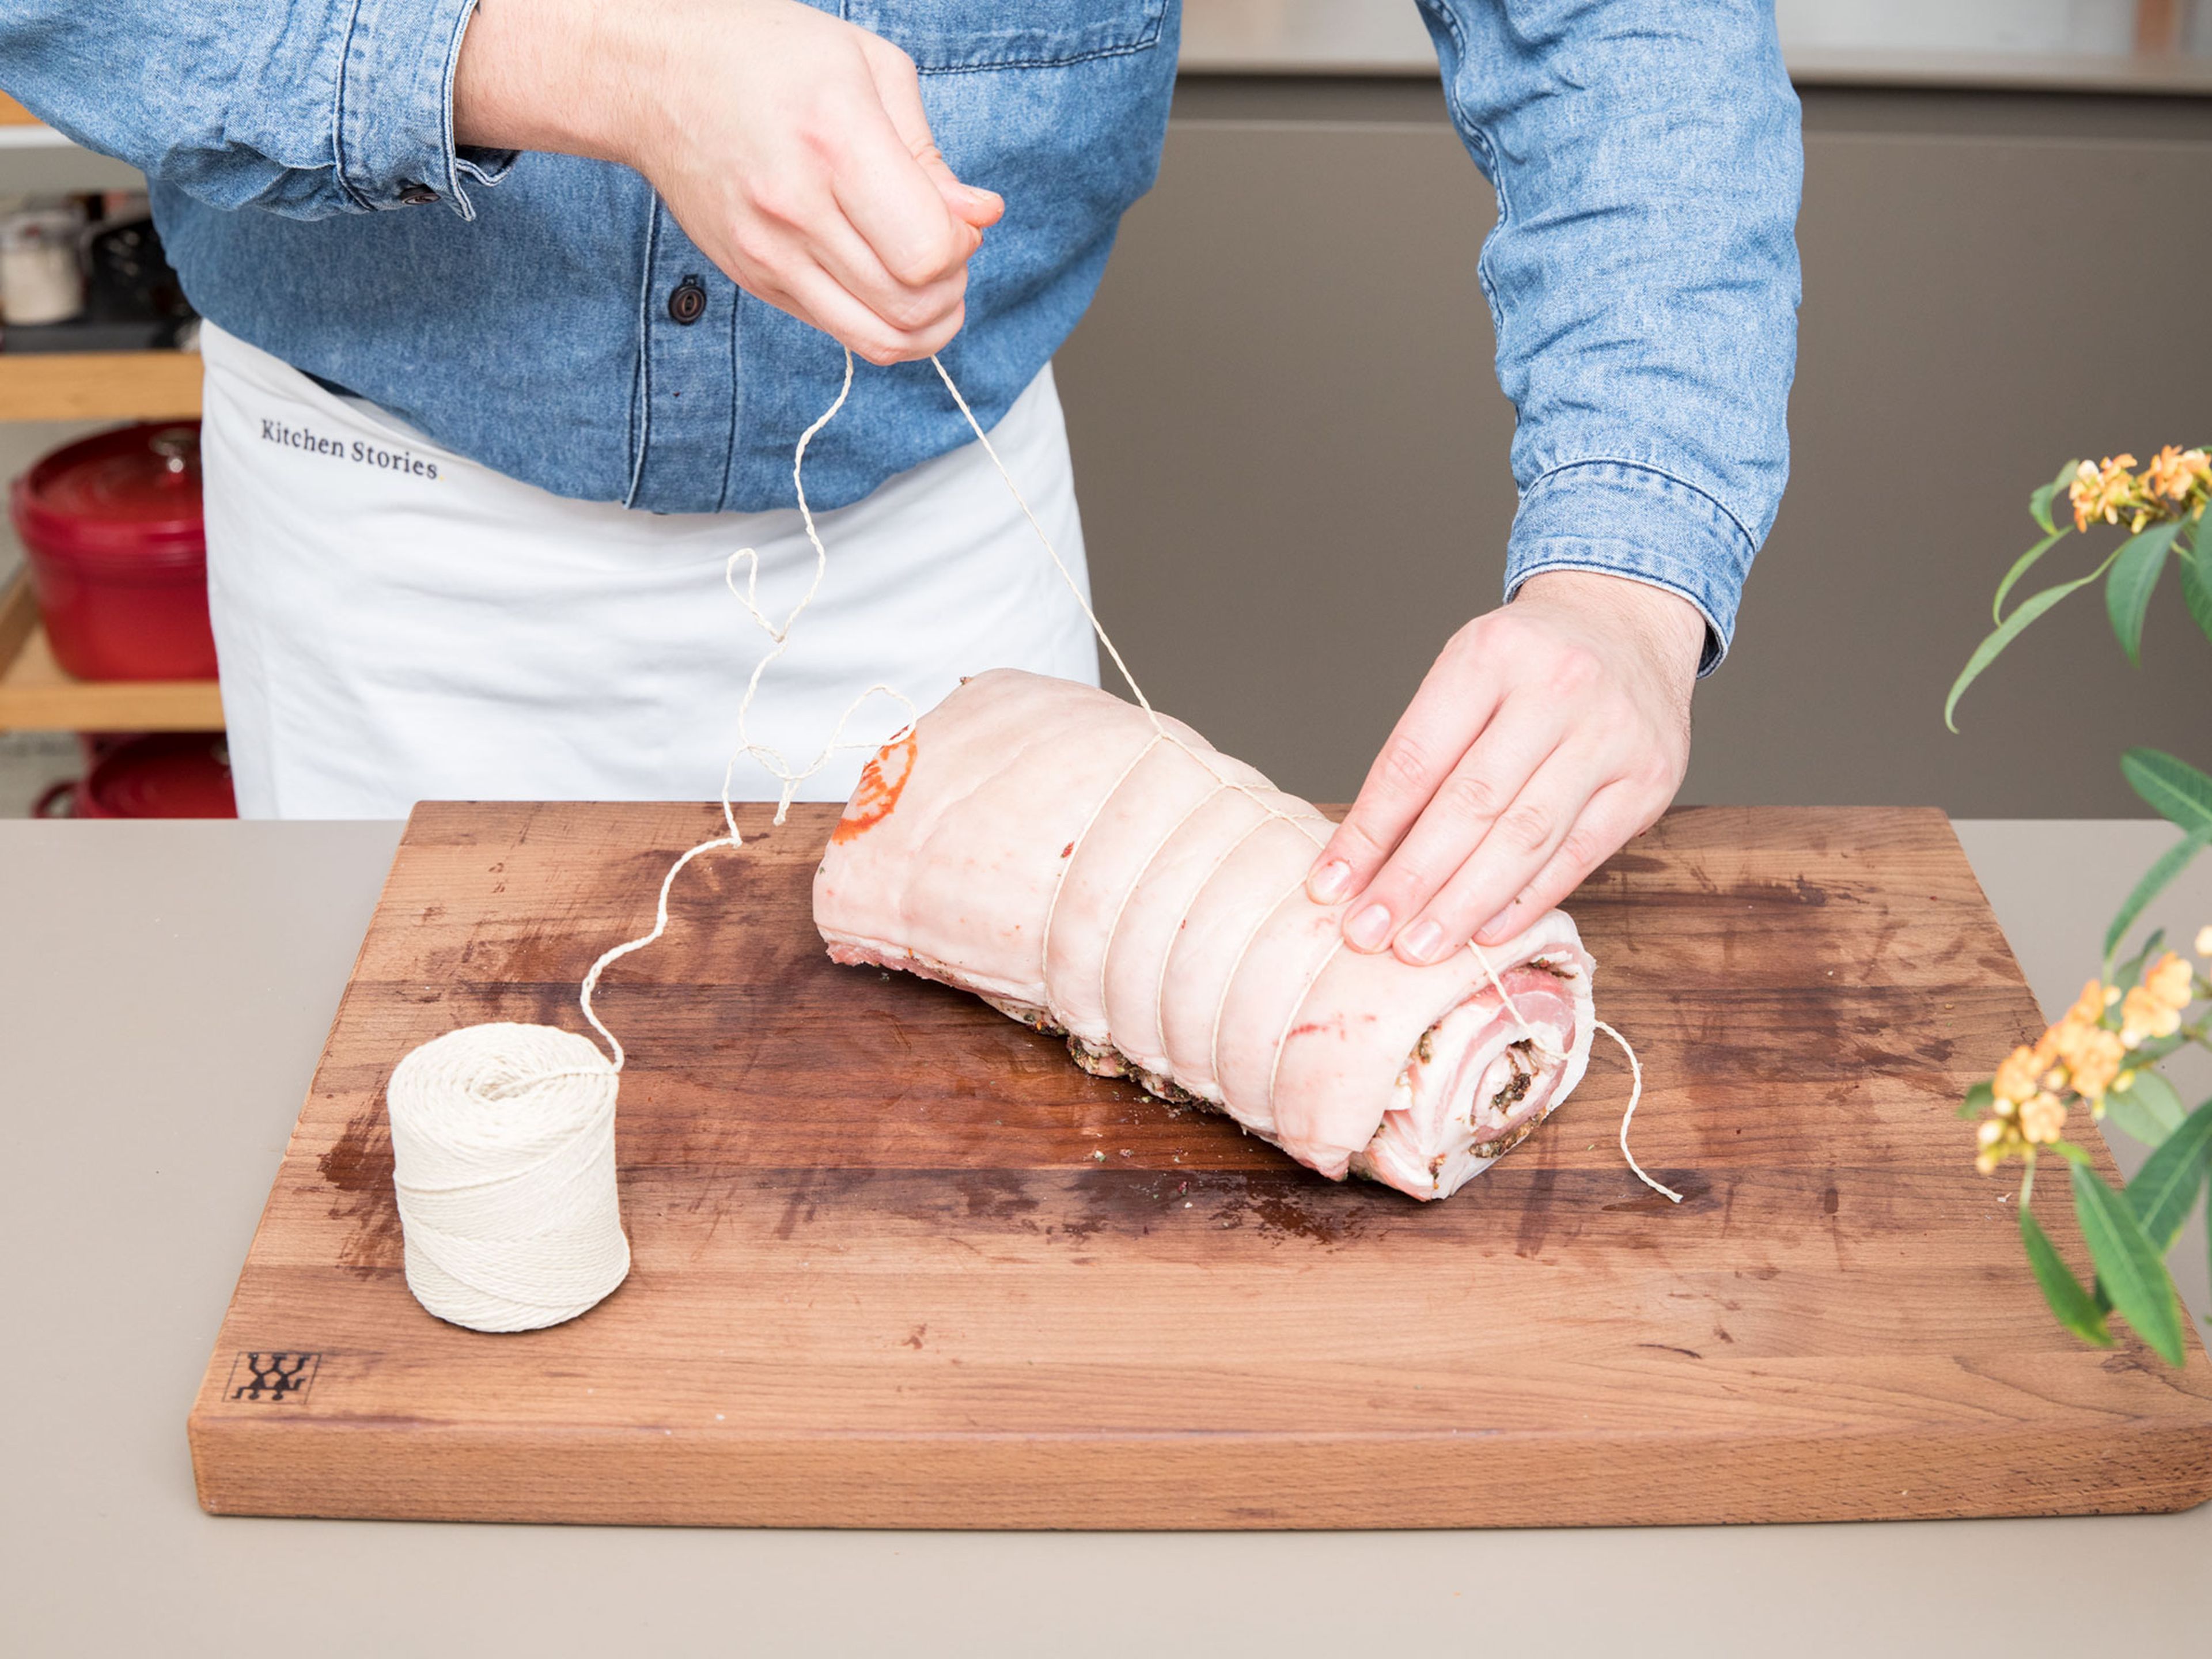 Roll pork belly into a log and use kitchen twine to tightly tie it up, leaving about 3/4-inch/2-cm of space between each section. Transfer the rolled pork to a baking dish and leave in the fridge for at least 12 hrs., or overnight, for the skin to dry out. On the next day, take the meat out of the fridge an hour before cooking to bring it down to room temperature.